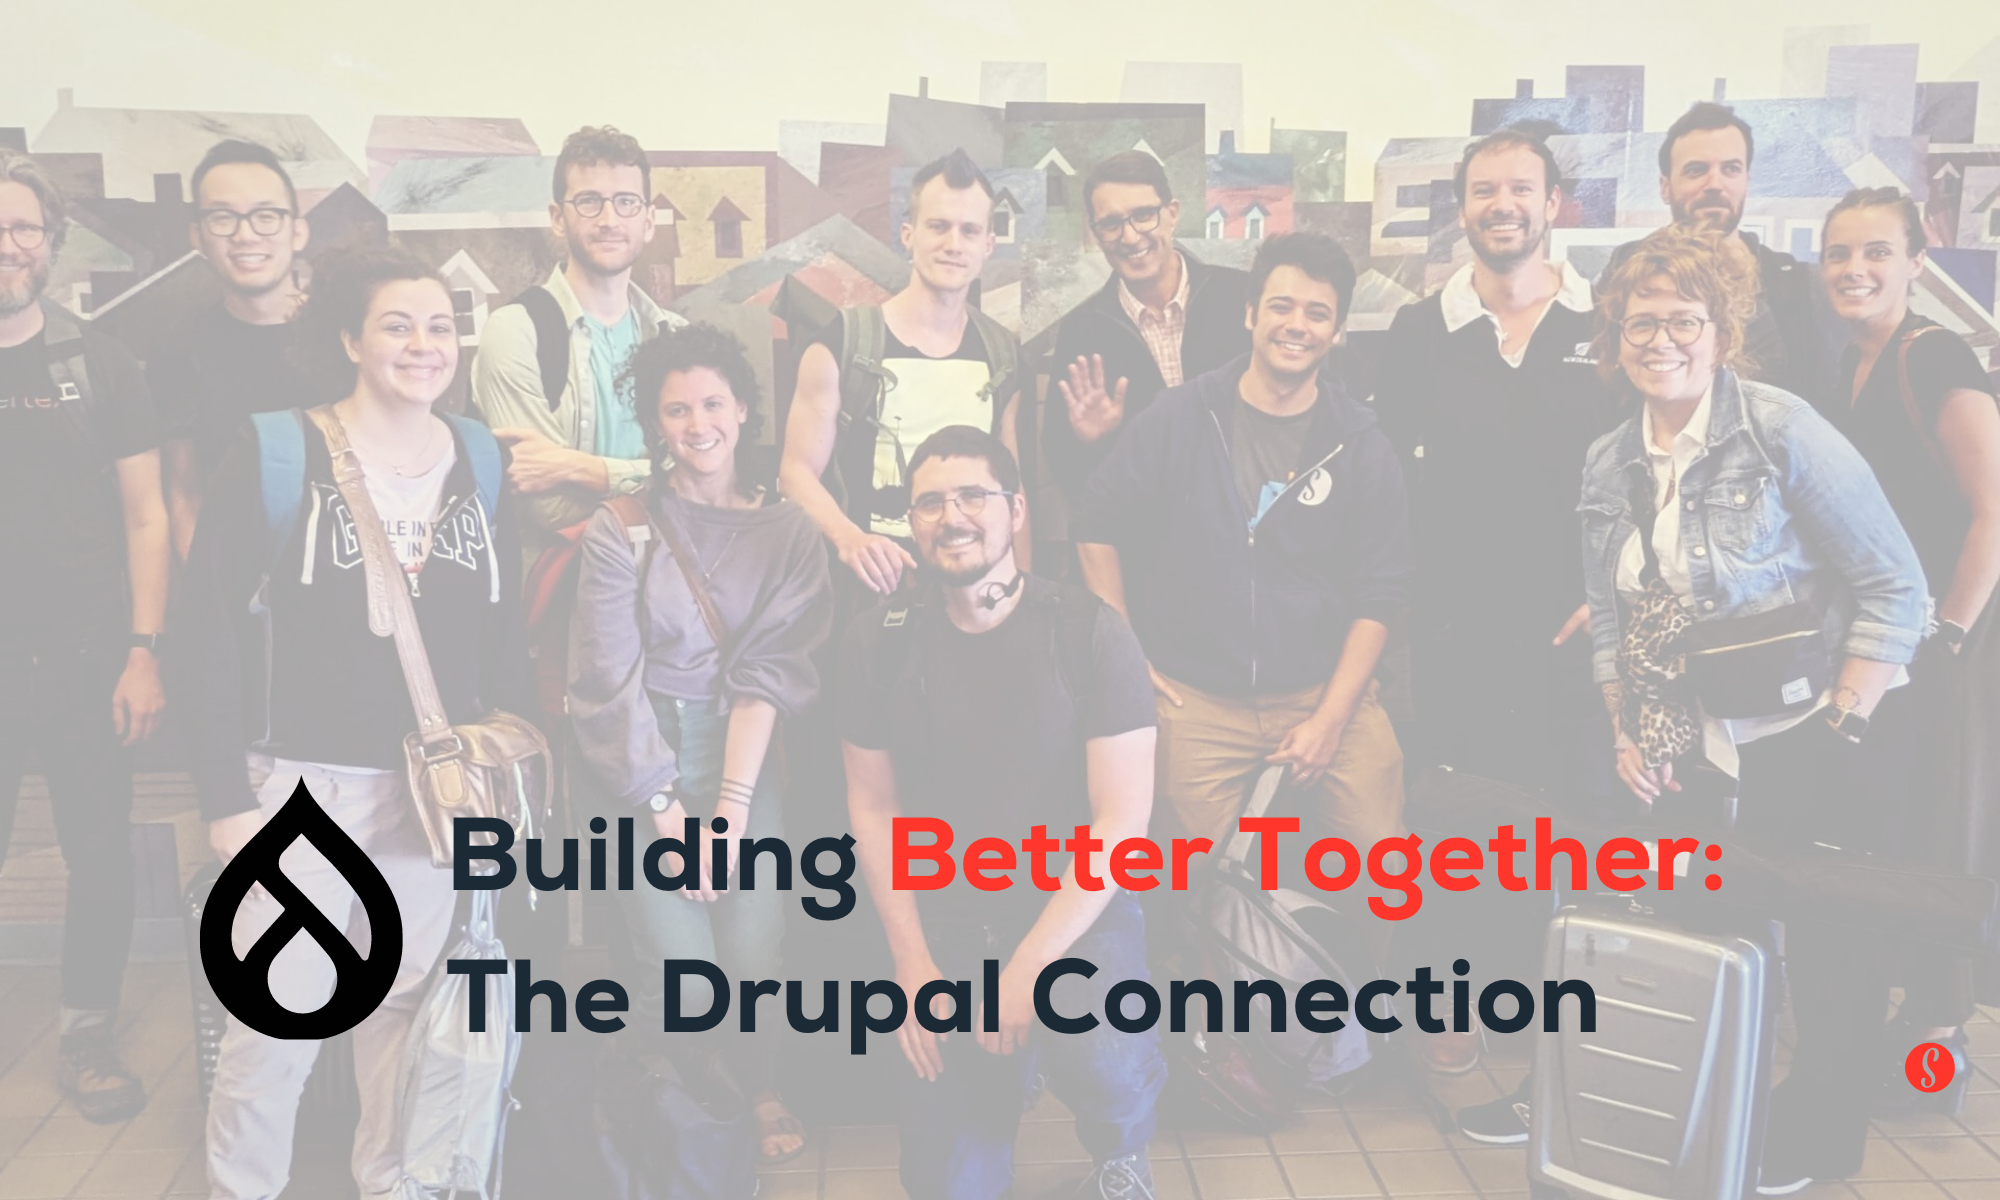 The Symetris team travelling together with Evolving Web Team to attend DrupalCon.